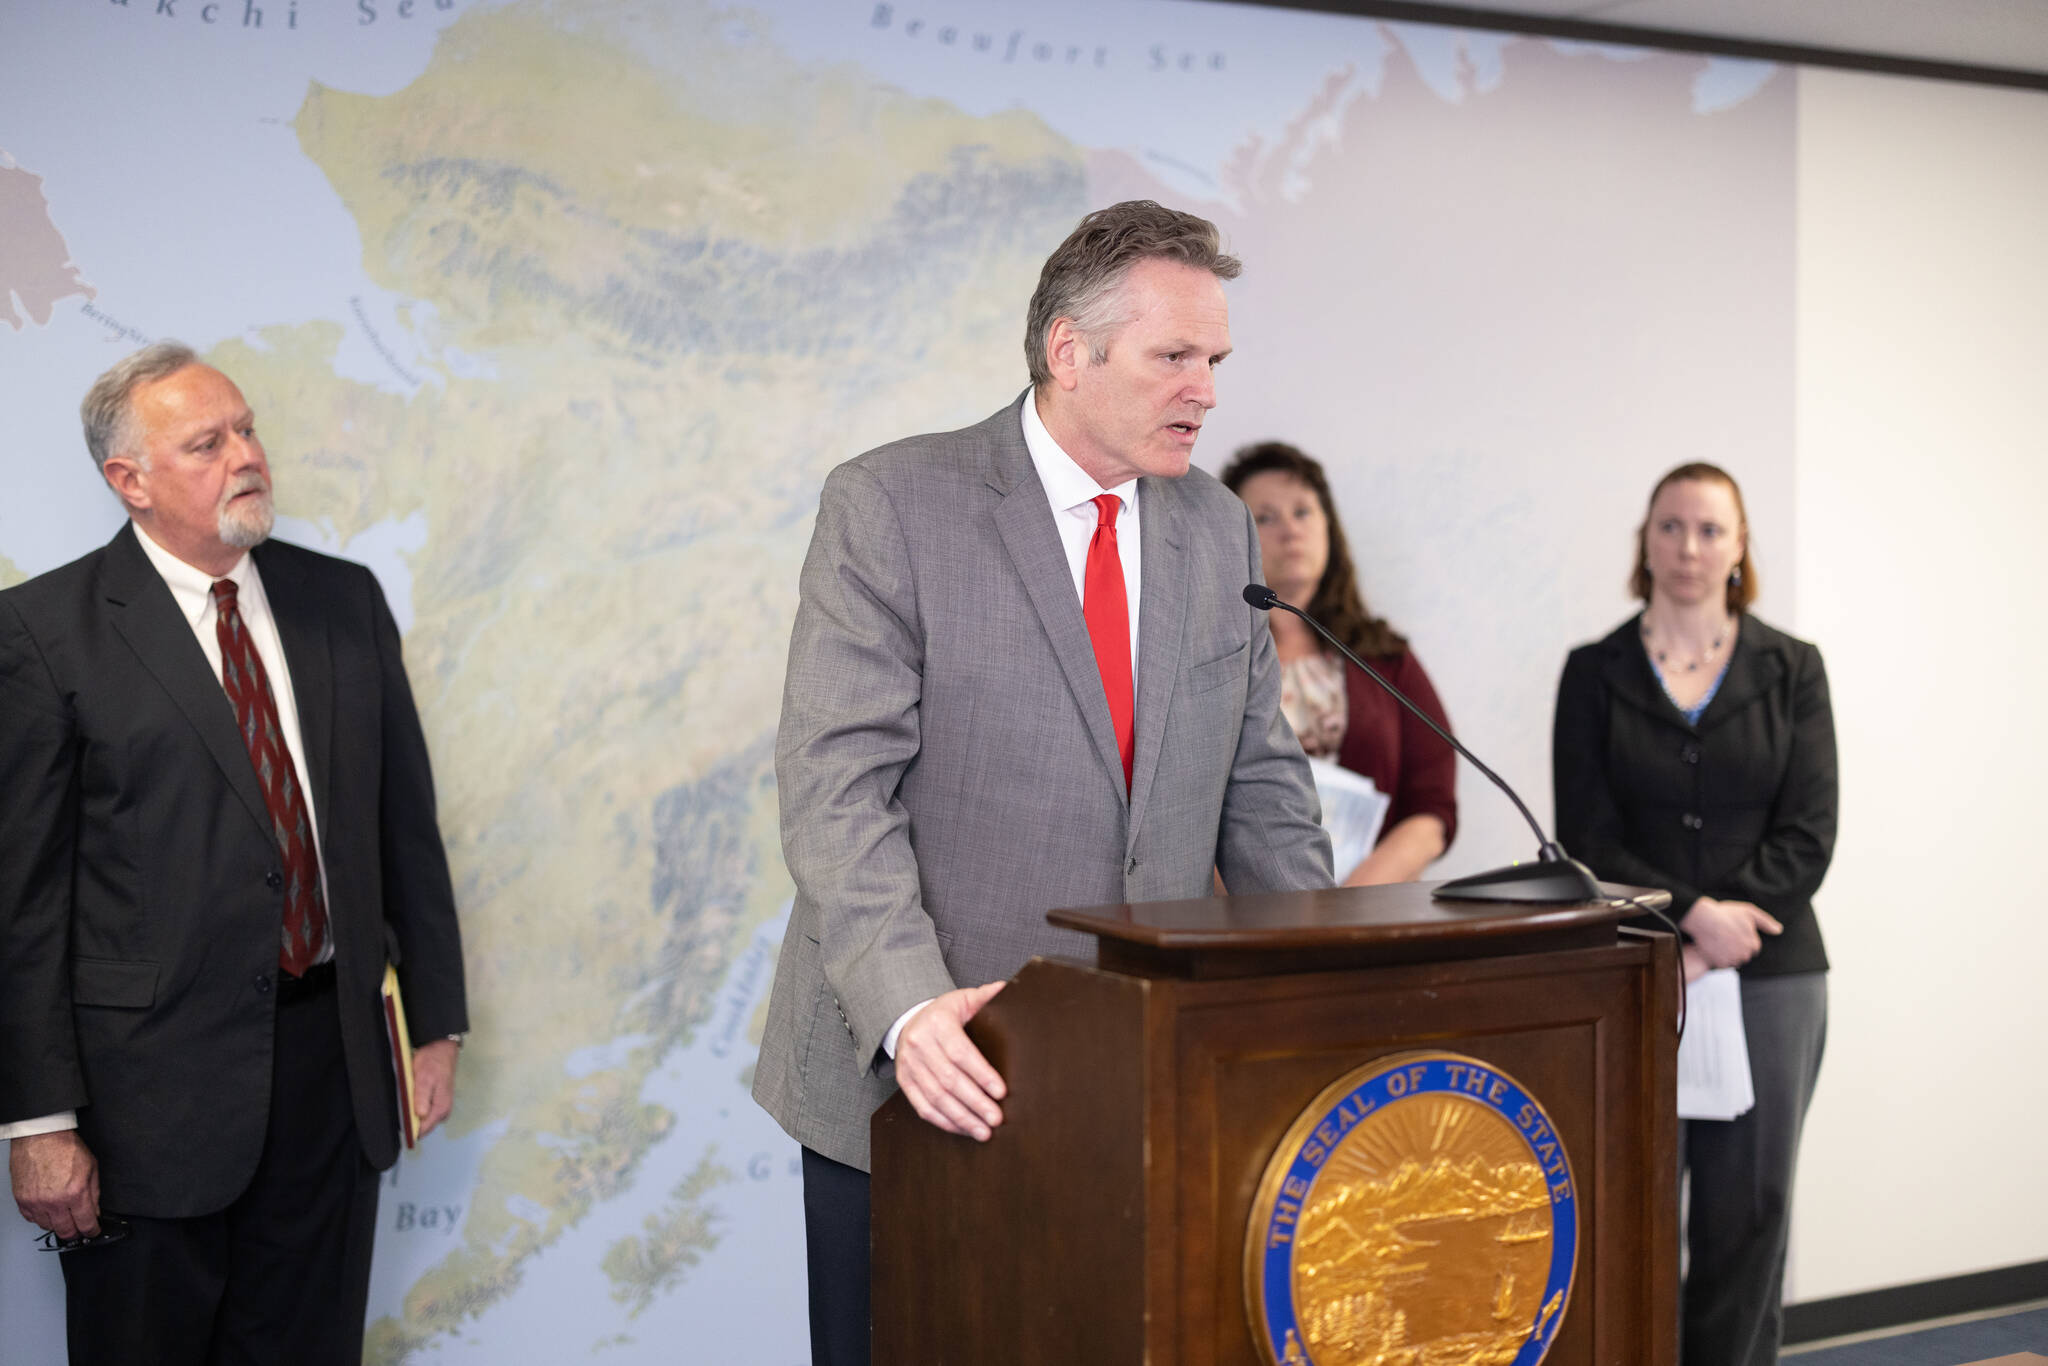 Alaska Gov. Mike Dunleavy holds a press conference announcing legal action related to the state’s ownership of submerged lands on Tuesday, April 26, 2022, in Anchorage, Alaska. (Photo courtesy Jeremy Cubas/Office of the Governor)